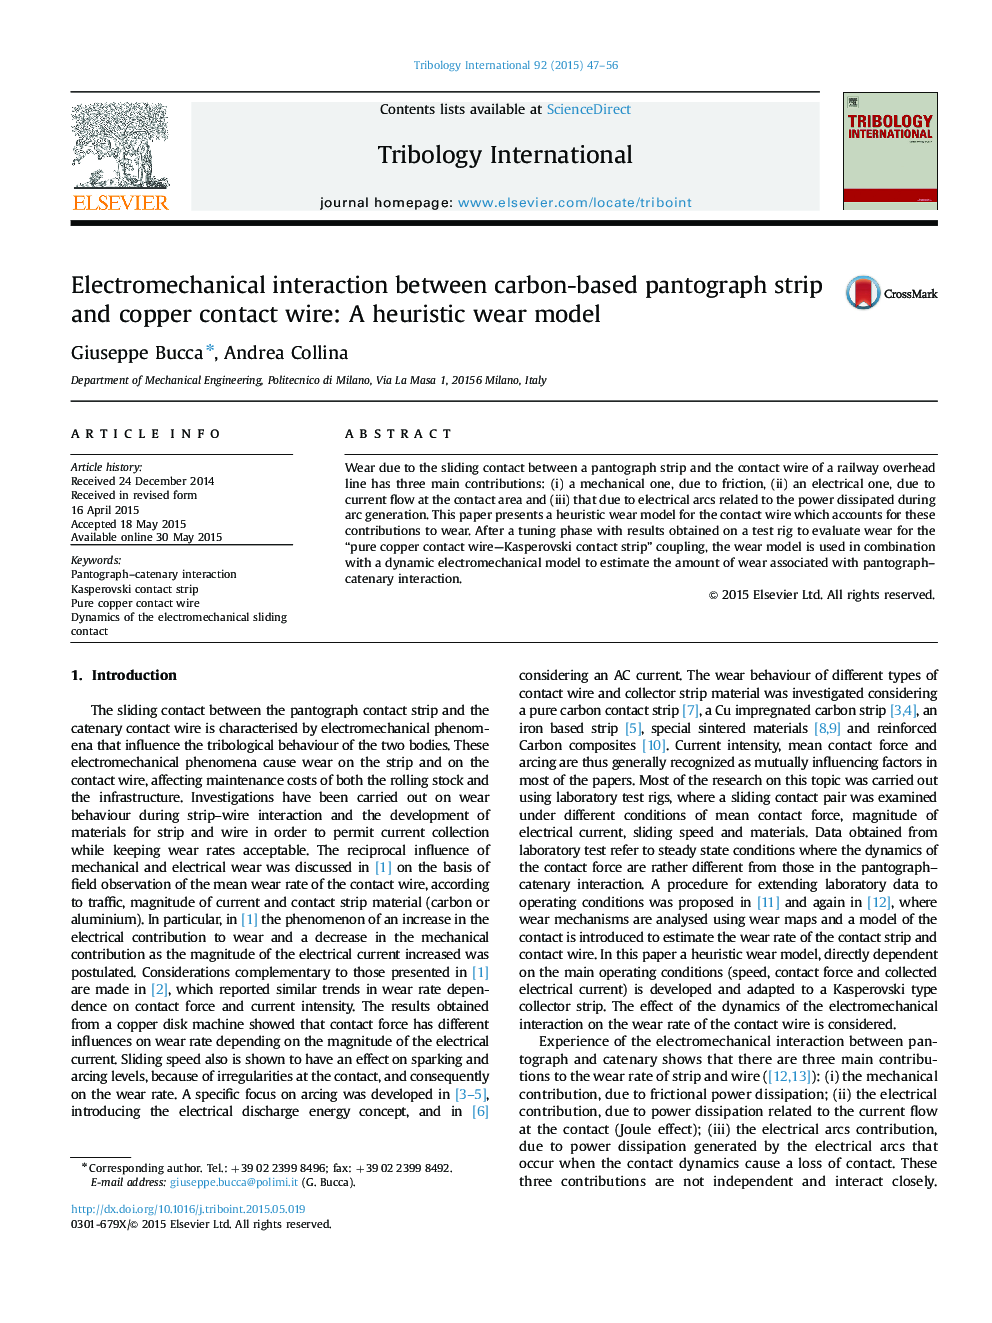 Electromechanical interaction between carbon-based pantograph strip and copper contact wire: A heuristic wear model